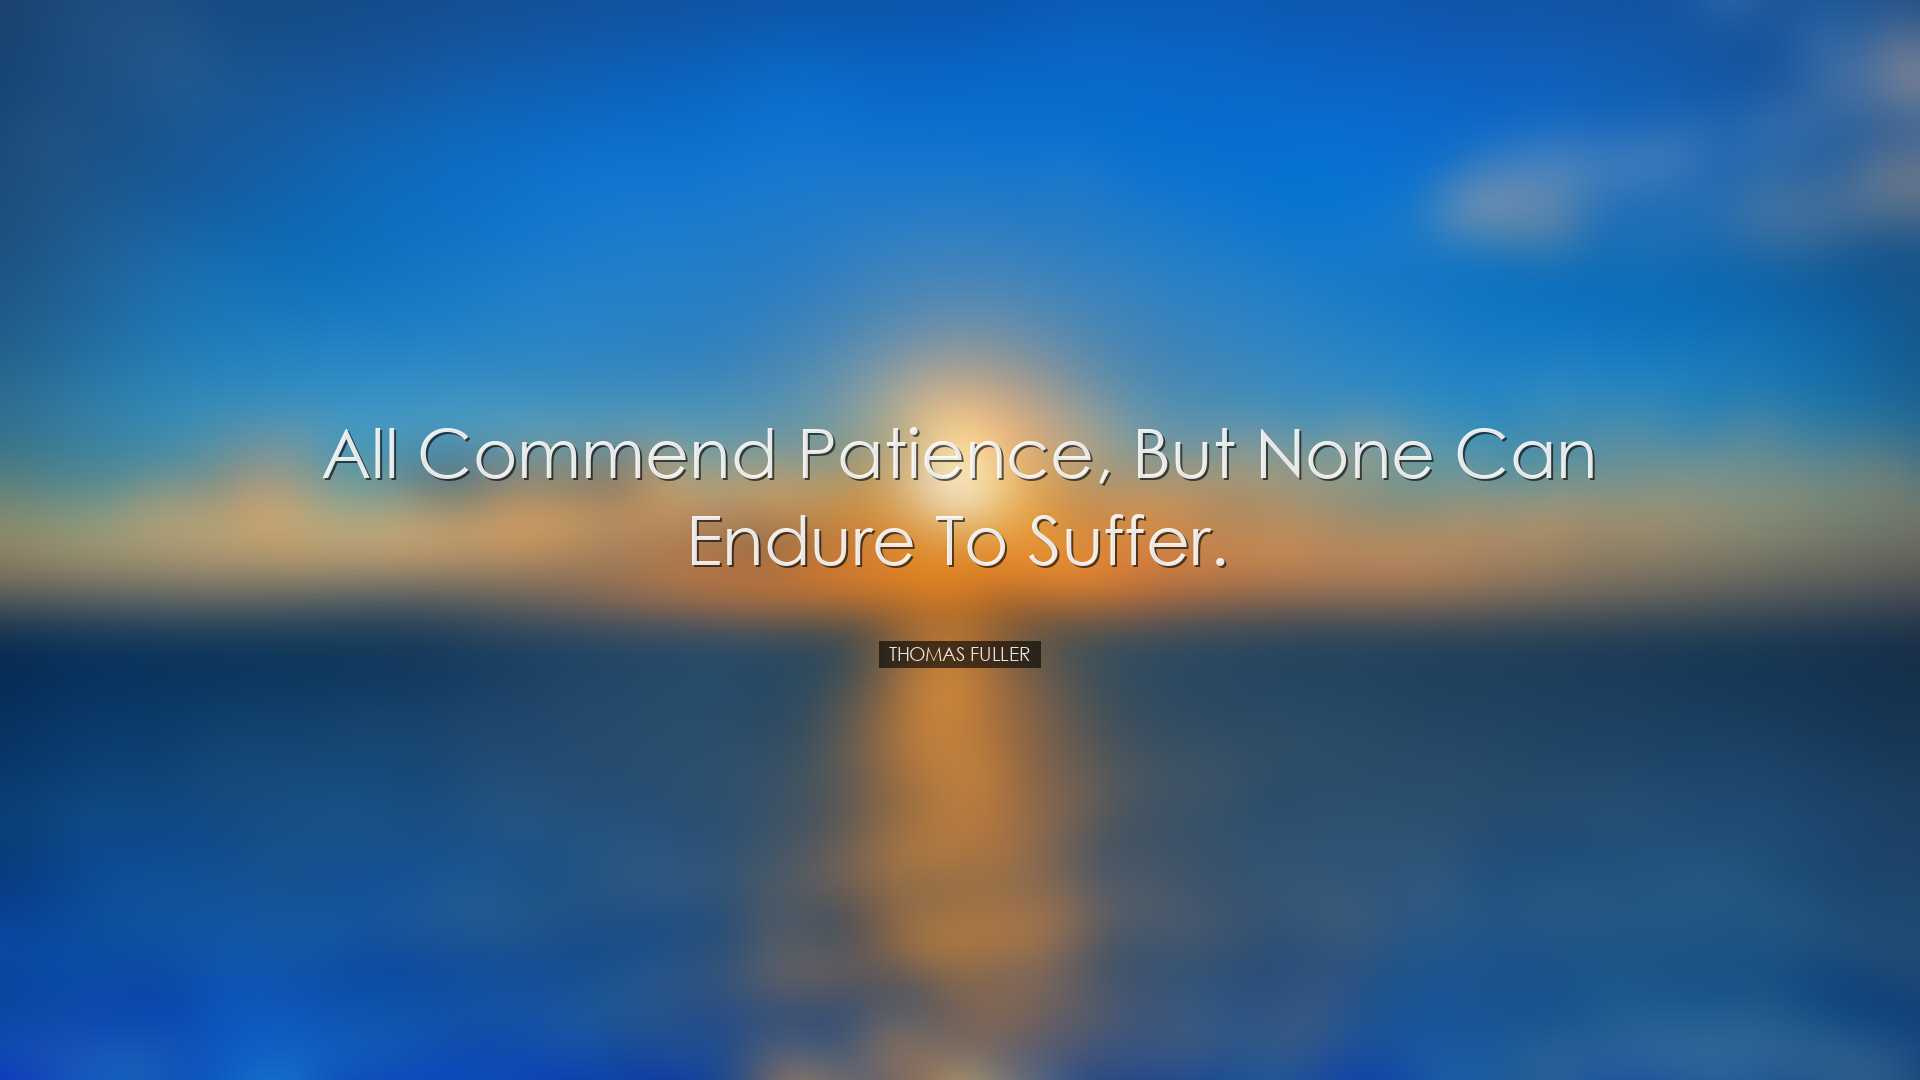 All commend patience, but none can endure to suffer. - Thomas Full